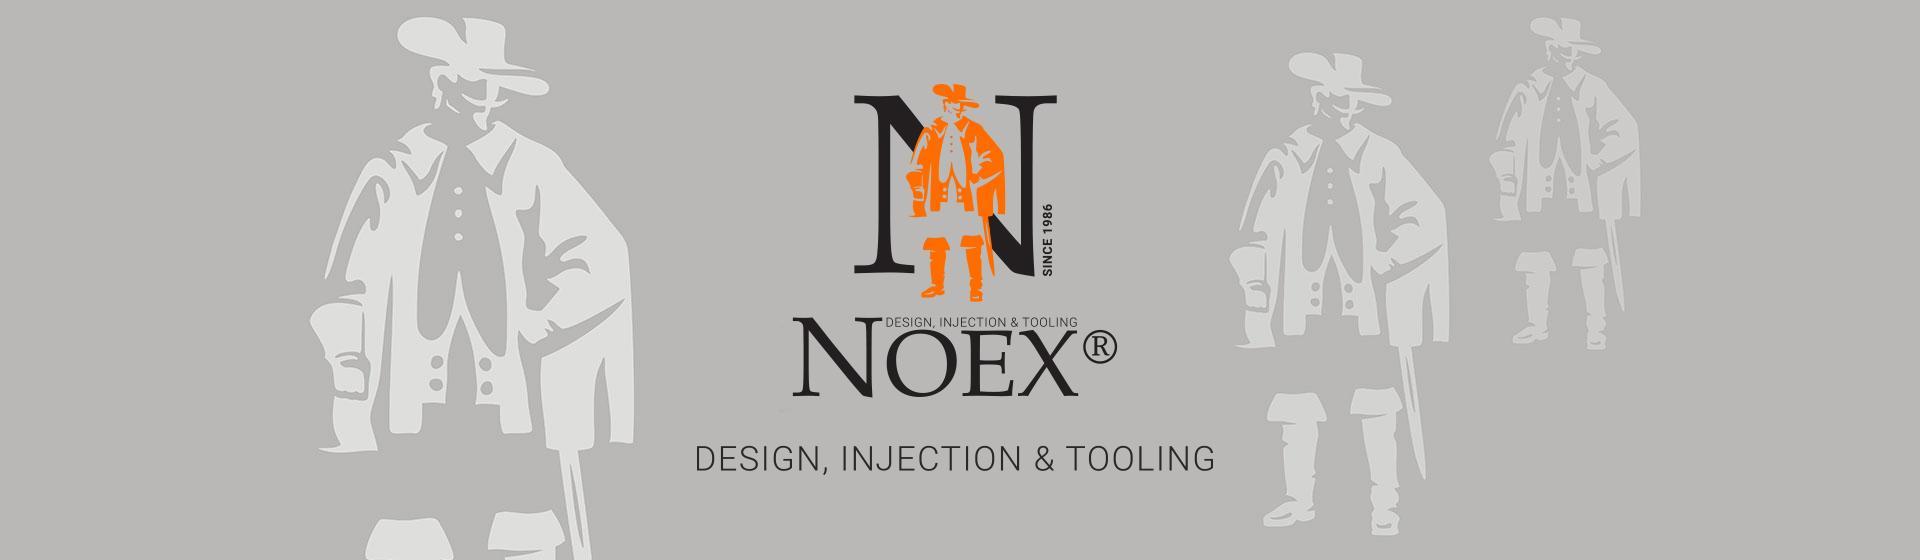 Noex - Design, inection, tooling - 1